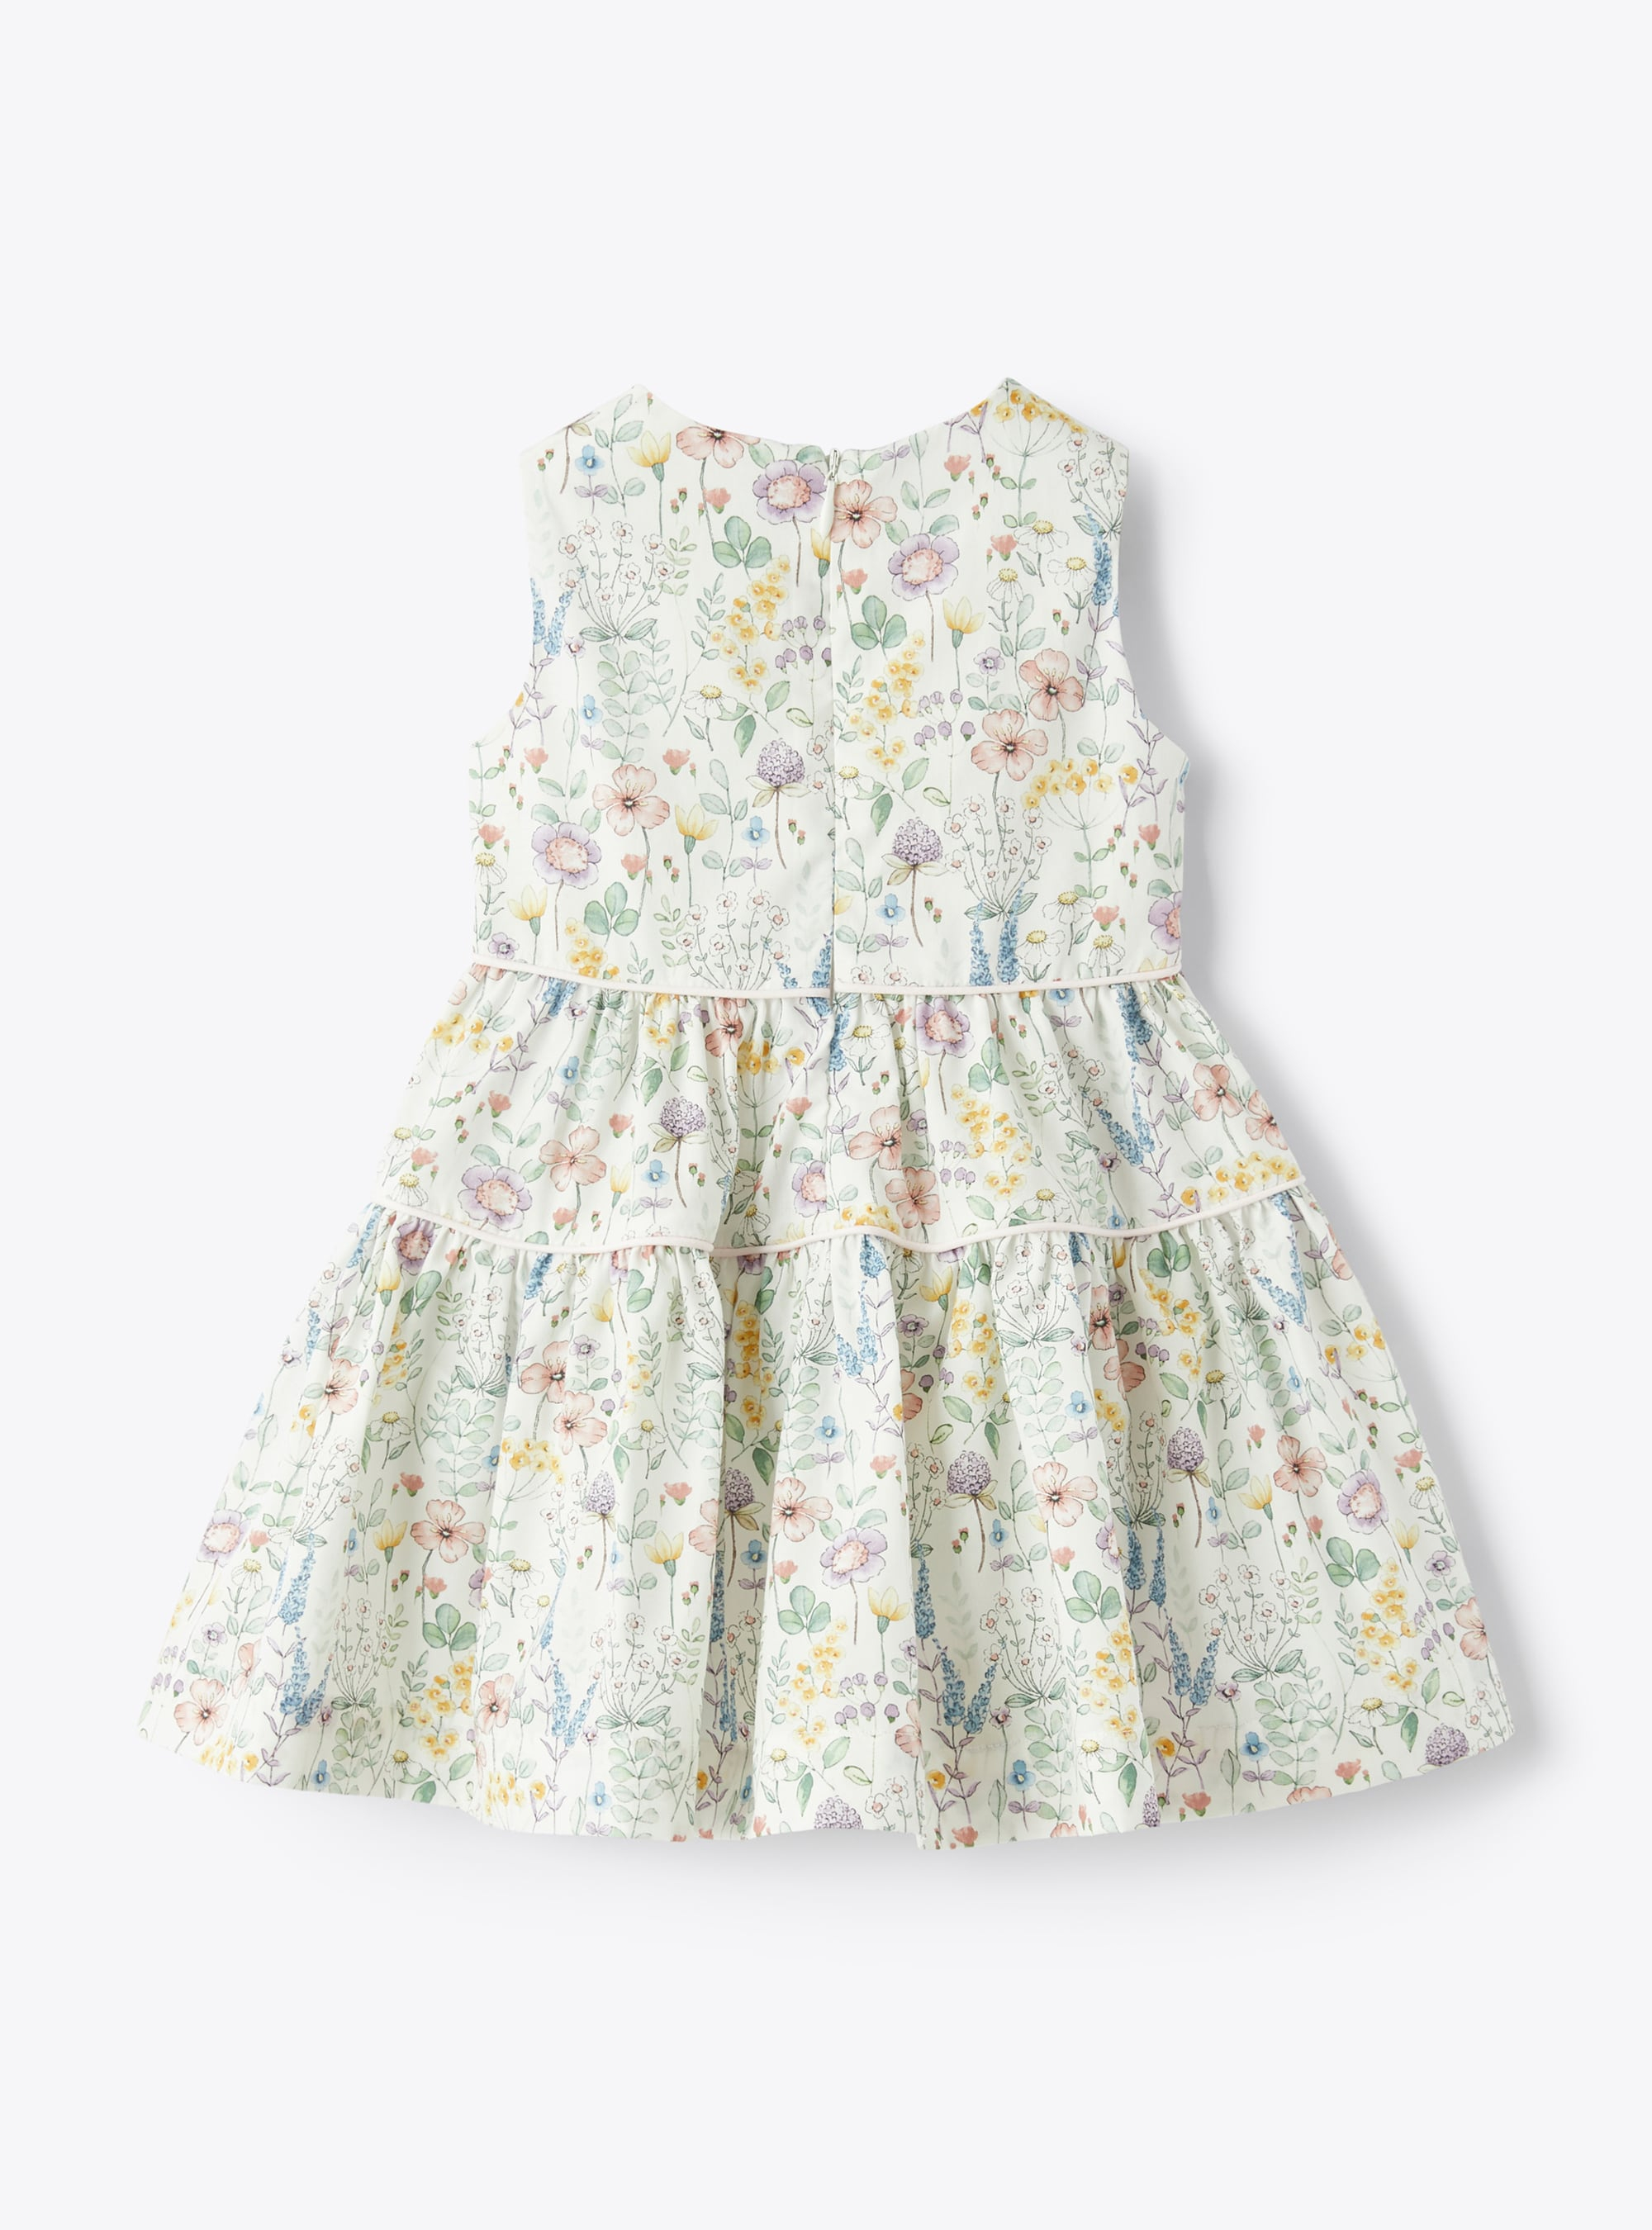 Dress in floral-patterned organic cotton - Green | Il Gufo